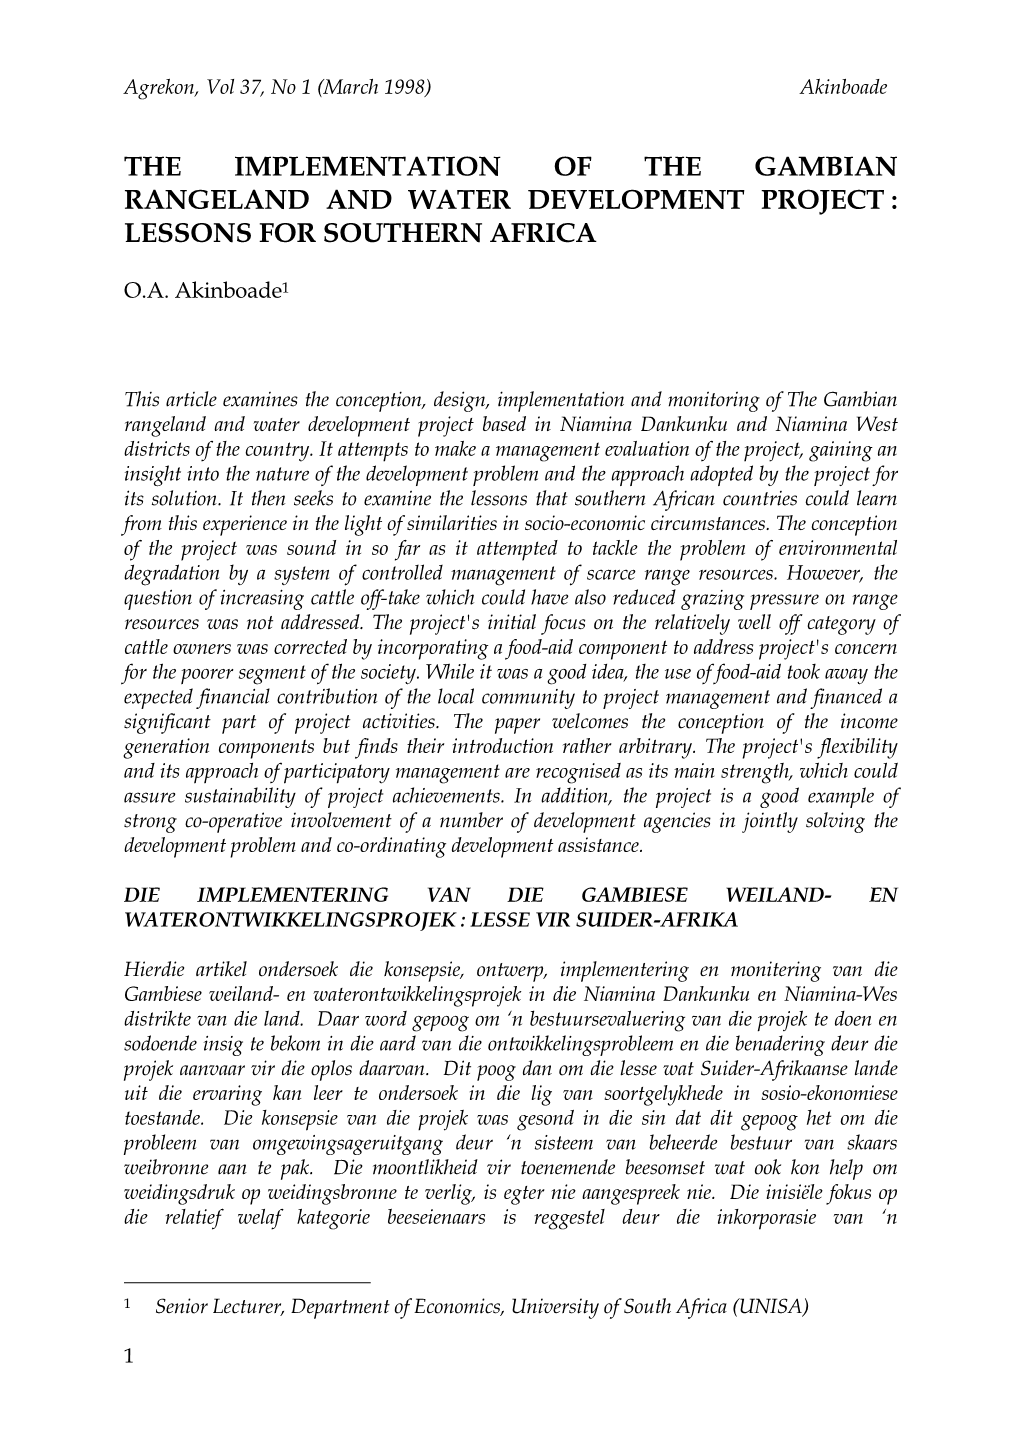 The Implementation of the Gambian Rangeland and Water Development Project : Lessons for Southern Africa